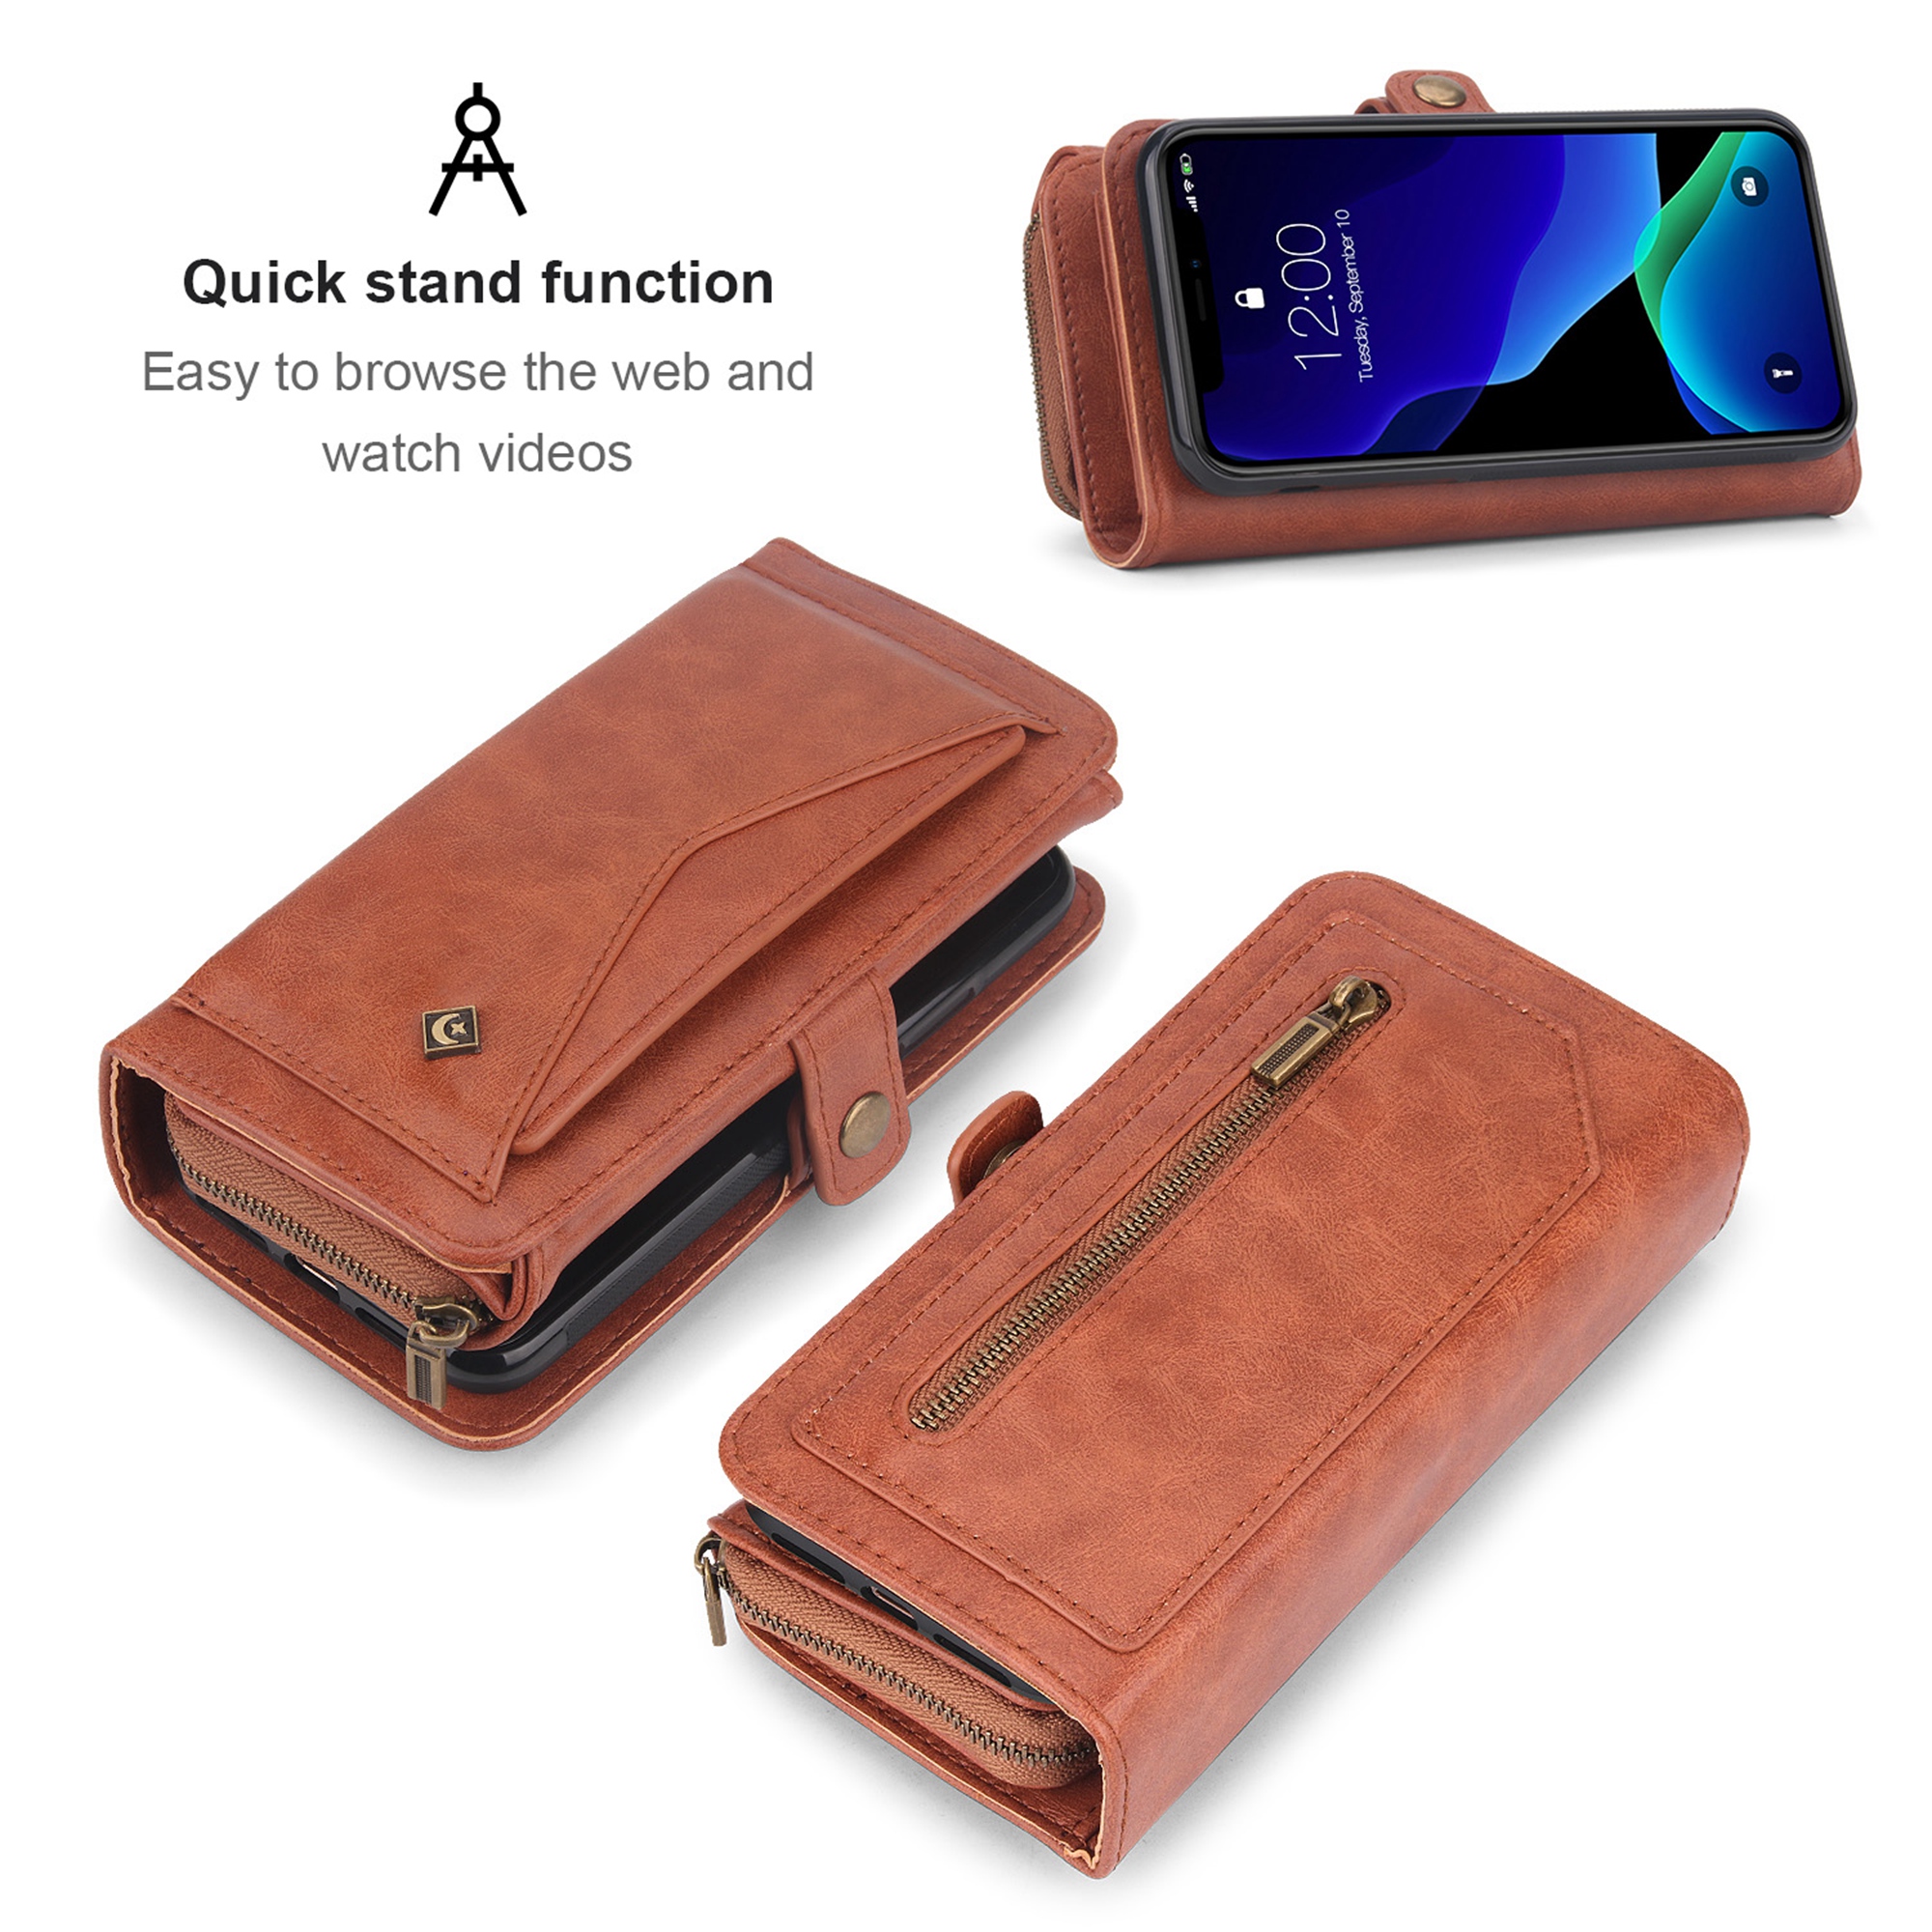 iPhone 11Pro 5.8 inch Wallet Case, Dteck 2 in 1 Leather Zipper Purse Multi-Function Tri-fold Wallet Case Detachable Magnetic Phone Cover with 14 Card Slots Money Pocket For iPhone 11 Pro,Brown - image 4 of 11